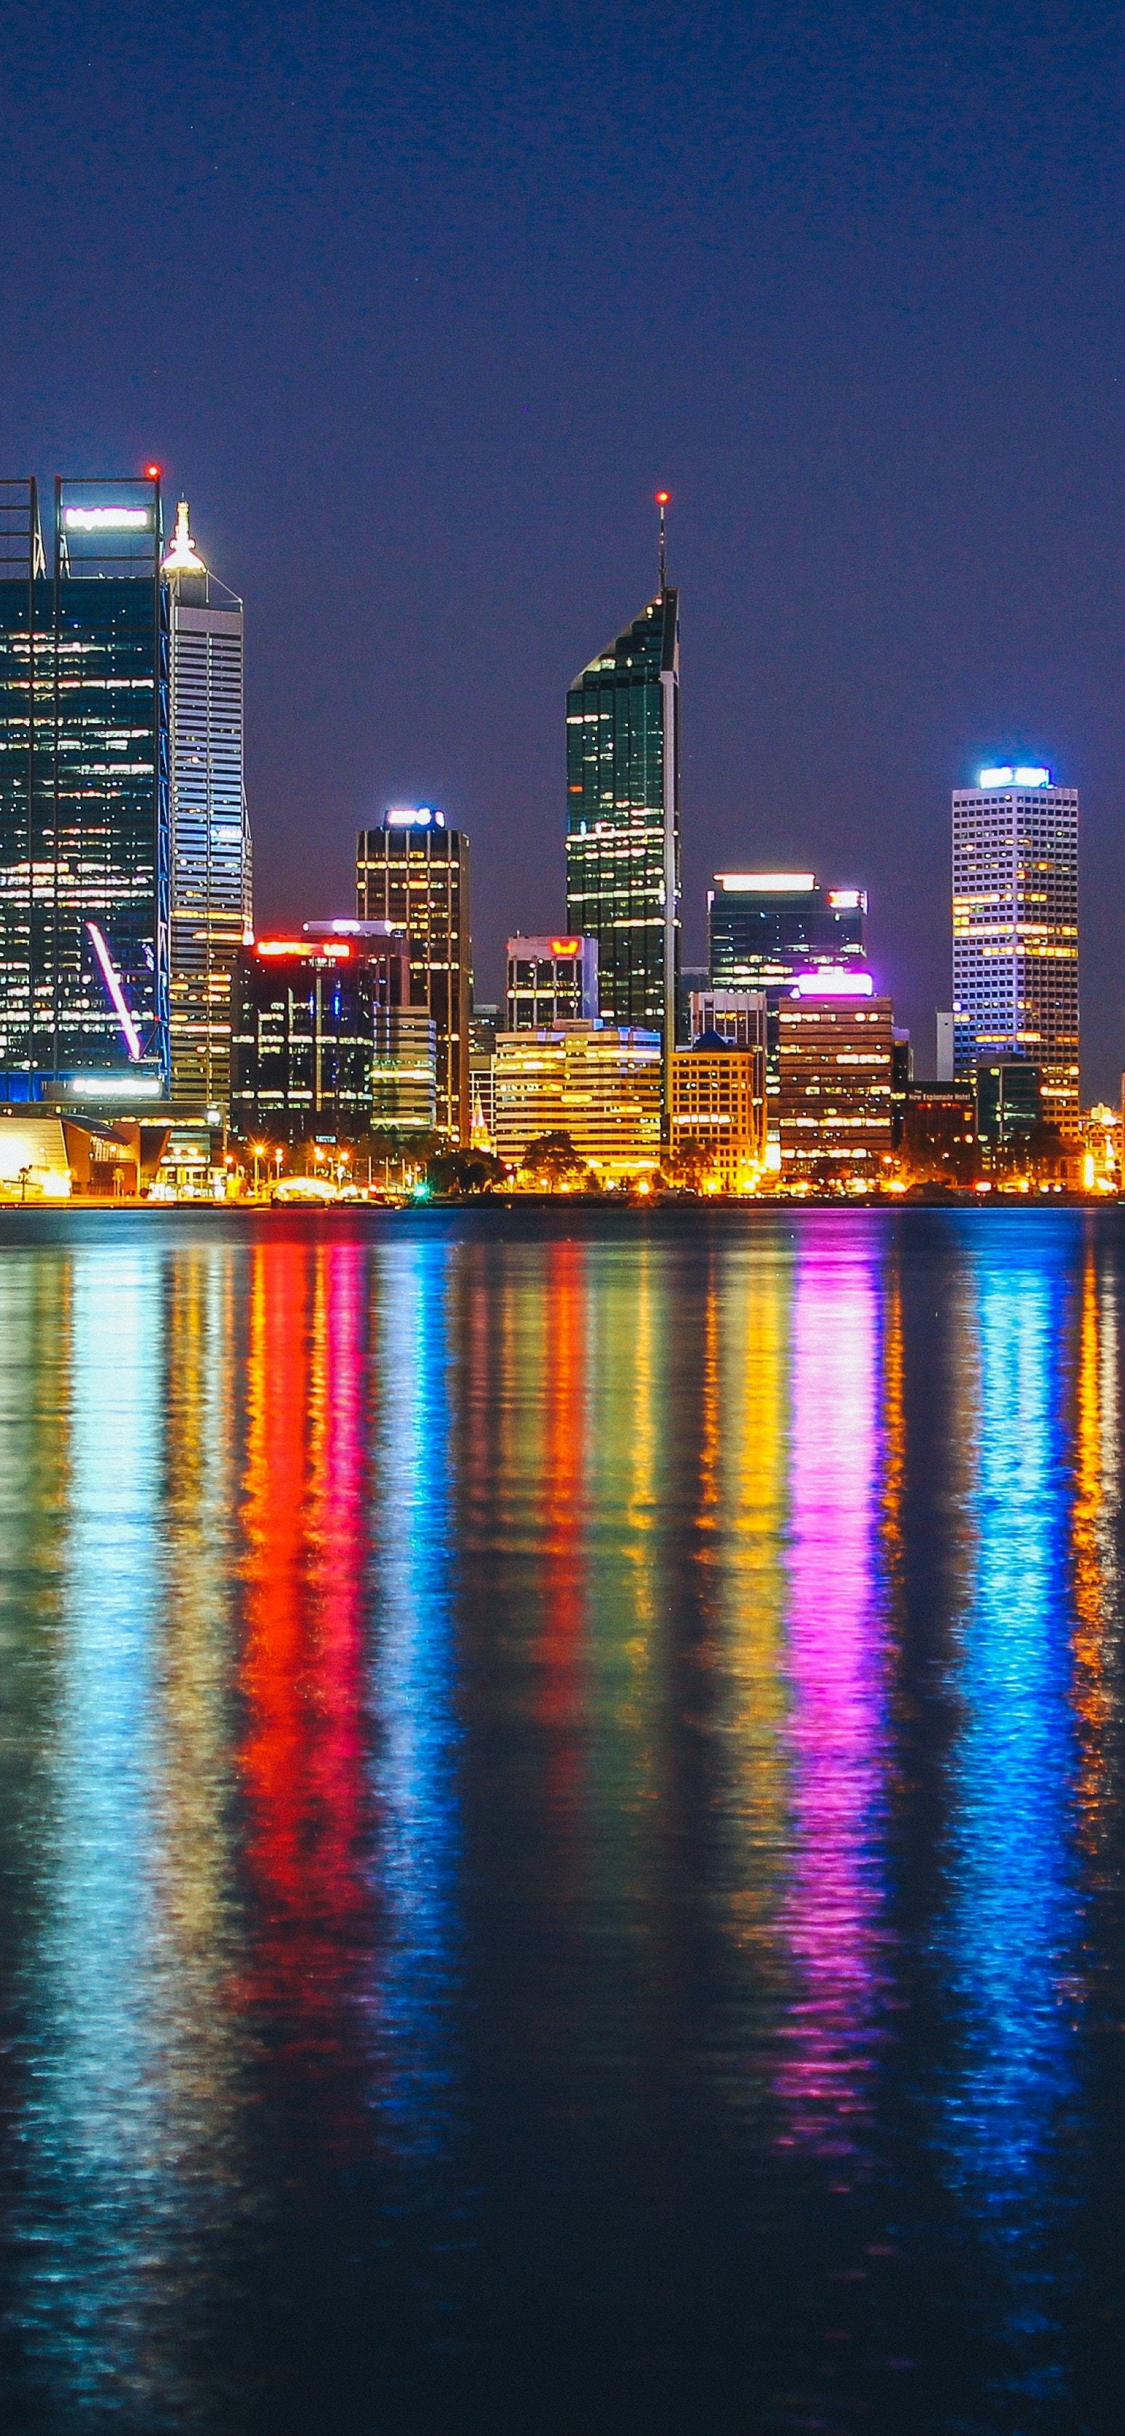 Download cityscape, buildings, colorful, reflections, night 1125x2436